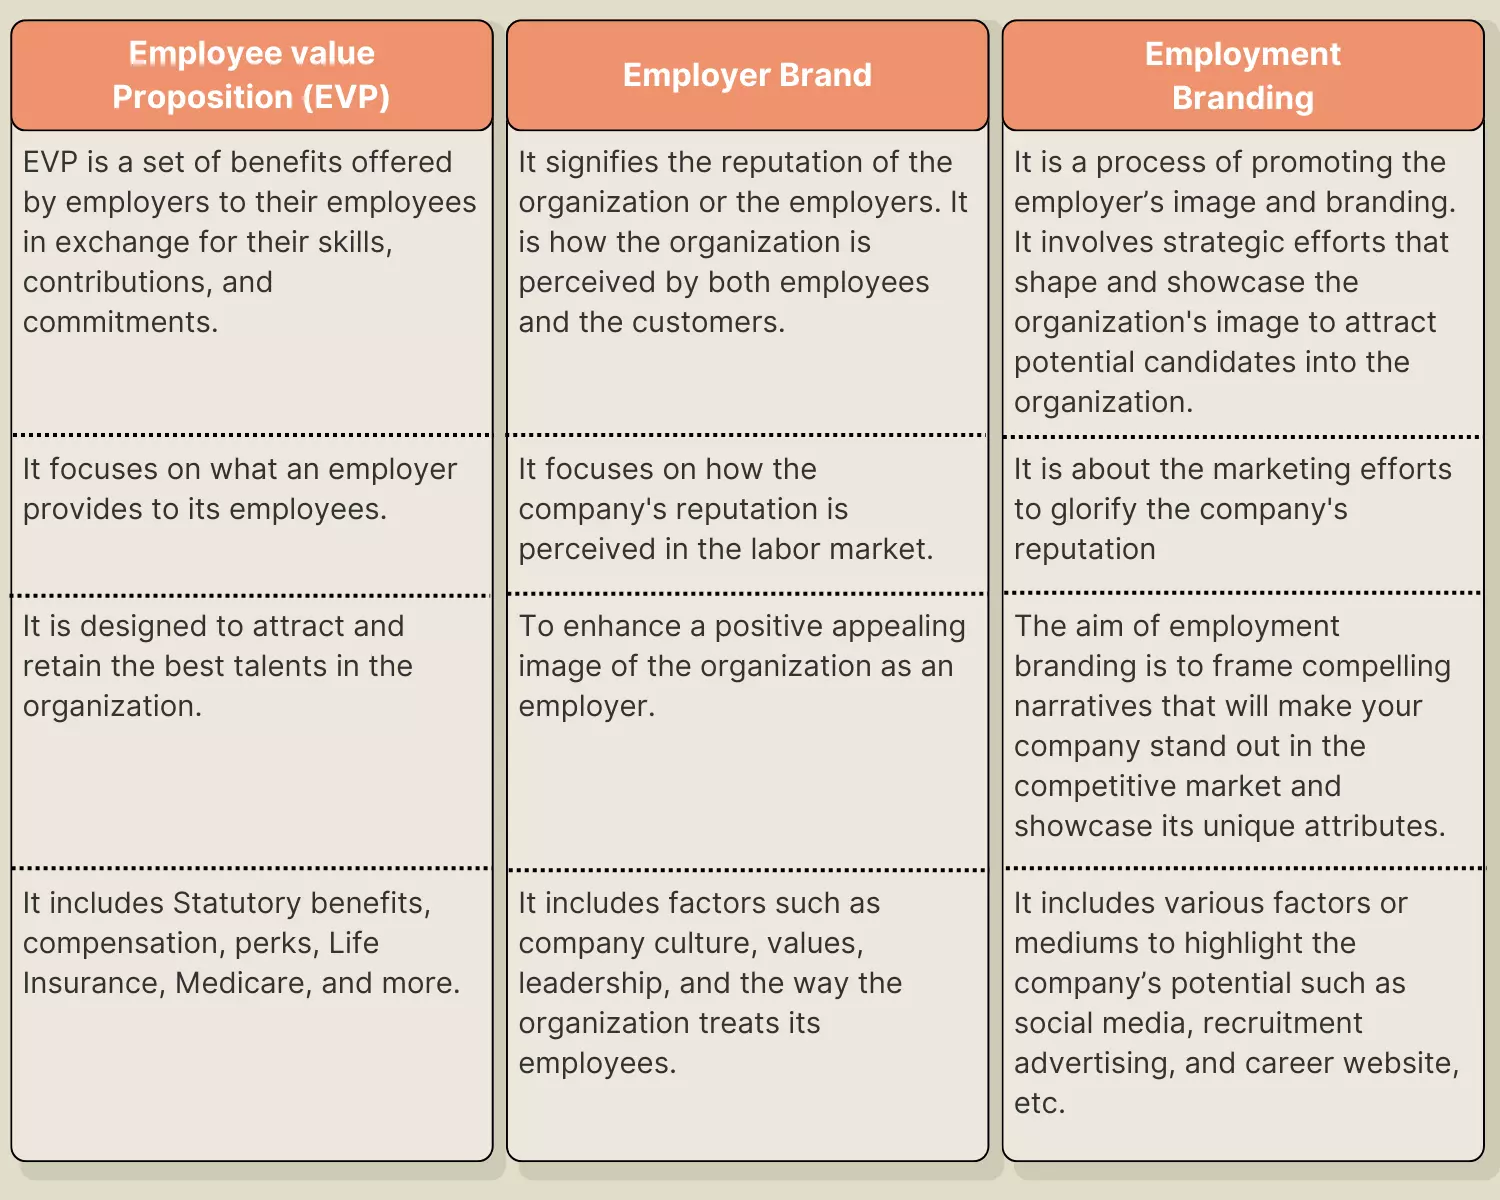 Difference between an EVP, Employer brand, and Employment branding